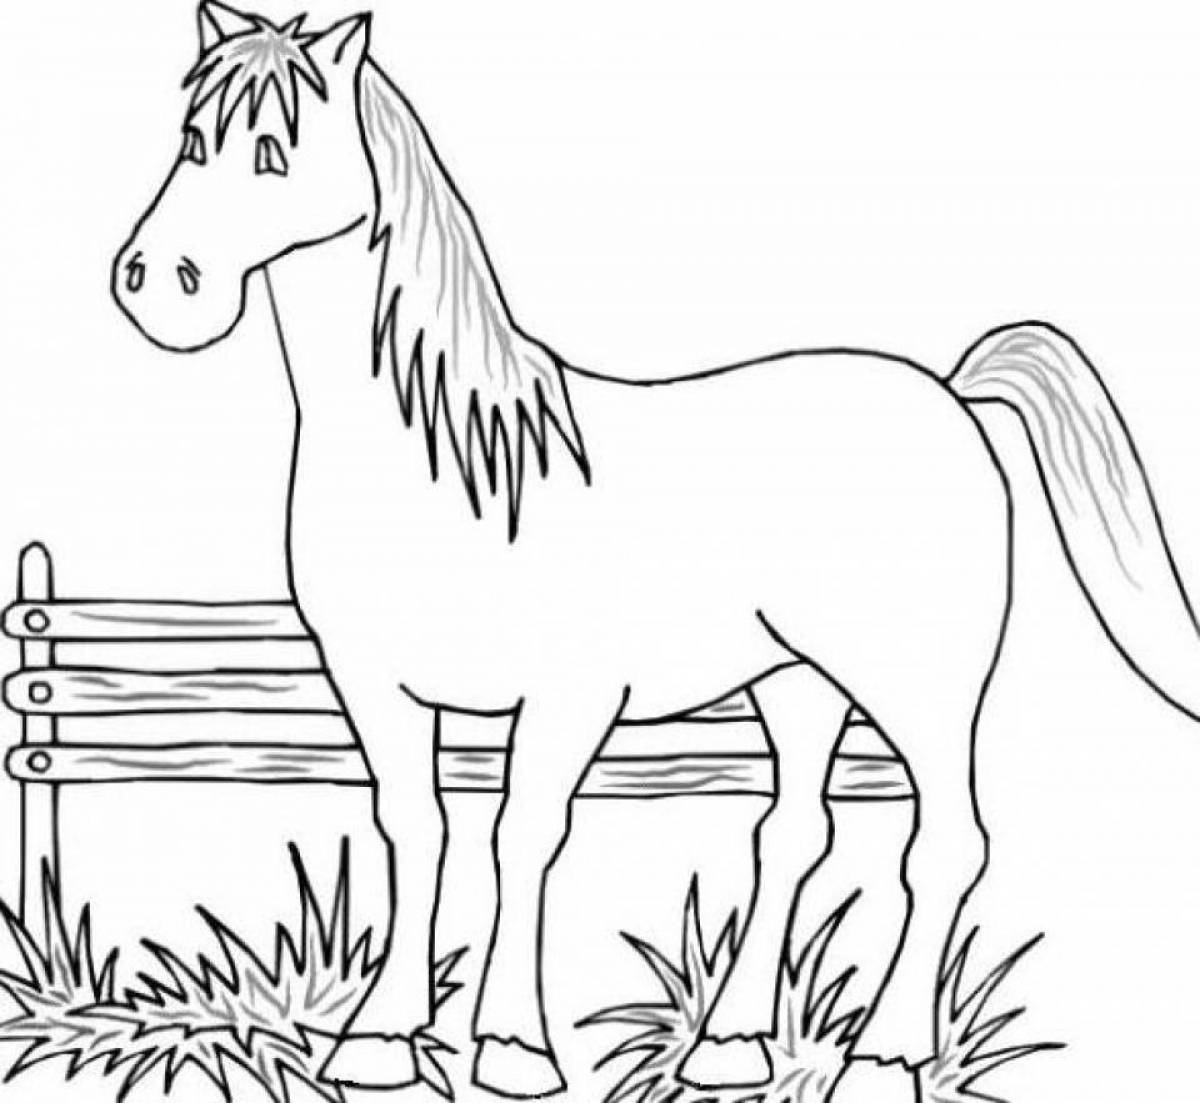 Favorite pet coloring pages for 3-4 year olds